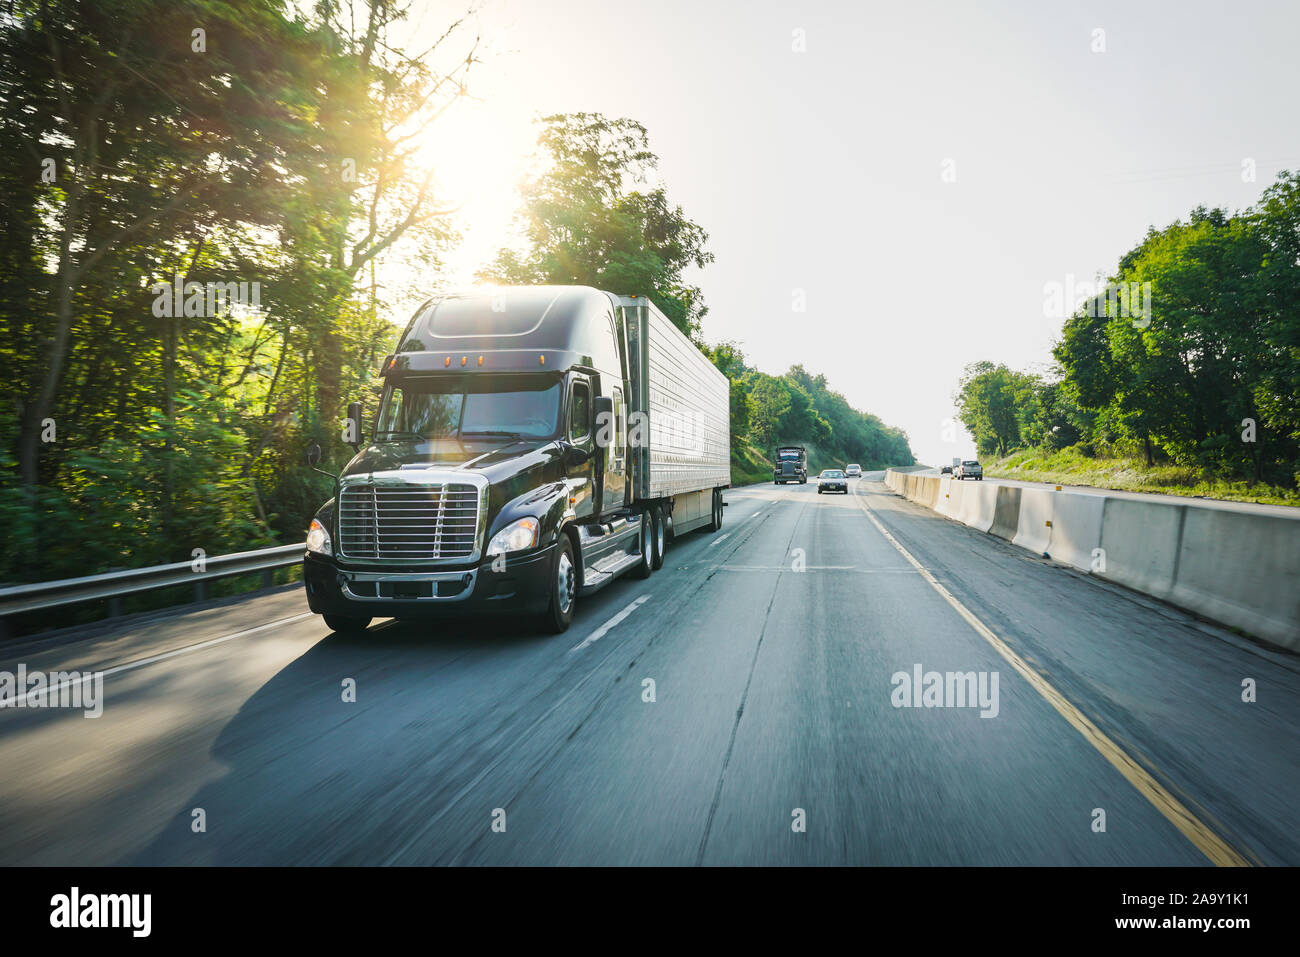 Commercial semi truck 18 wheeler on highway delivering freight Stock Photo